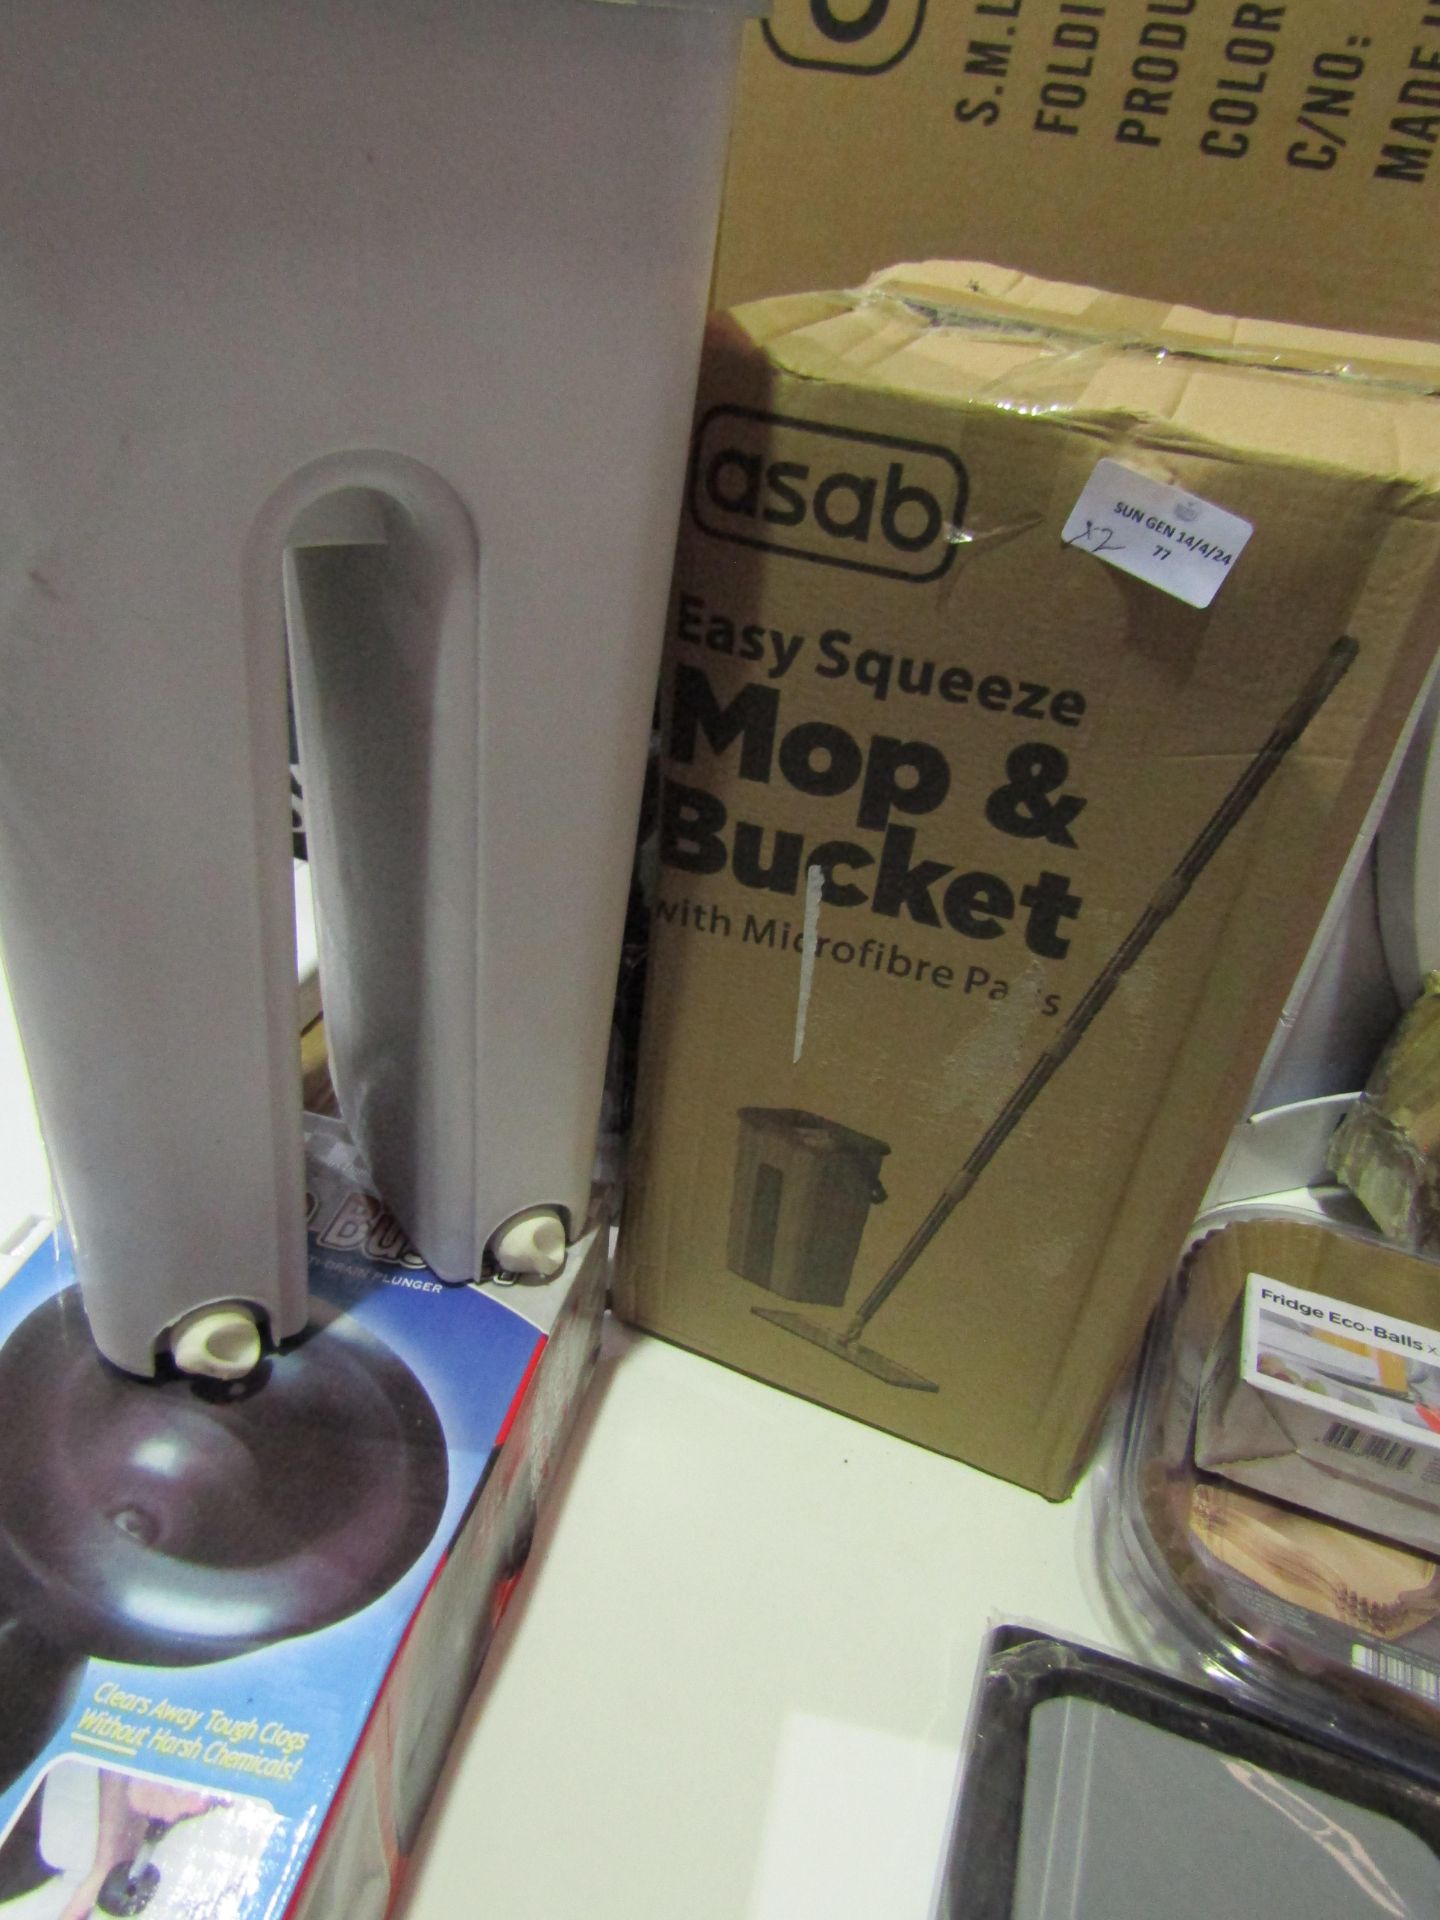 2x Asab Easy Squeeze Mop & Bucket With Microfibre Pads - Both Unchecked & Only One Boxed.